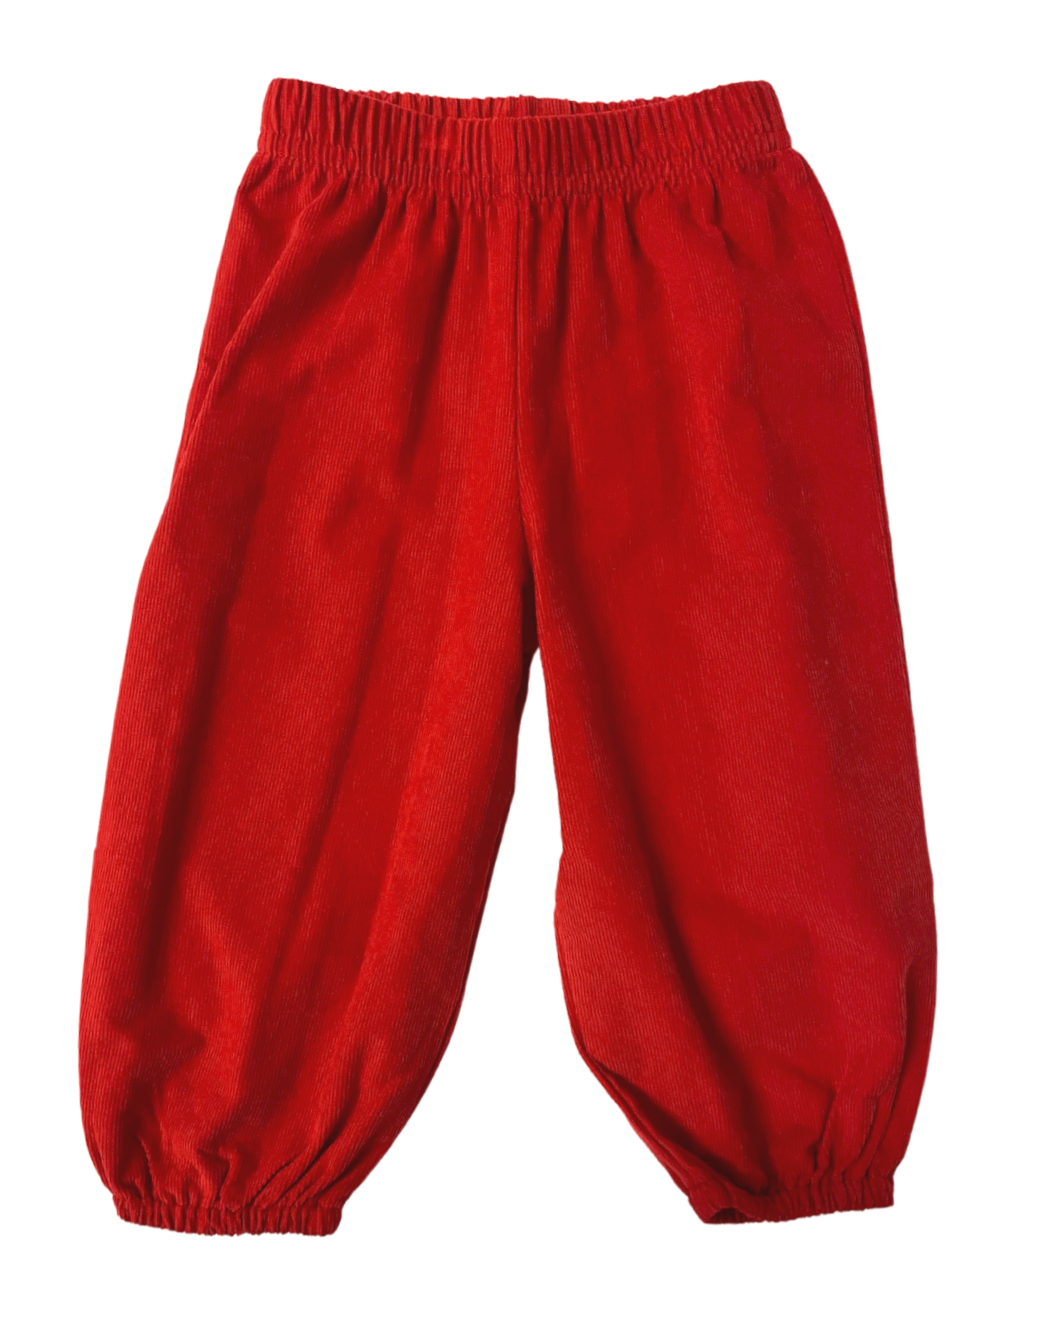 Banded Pull On Pant-Red Corduroy